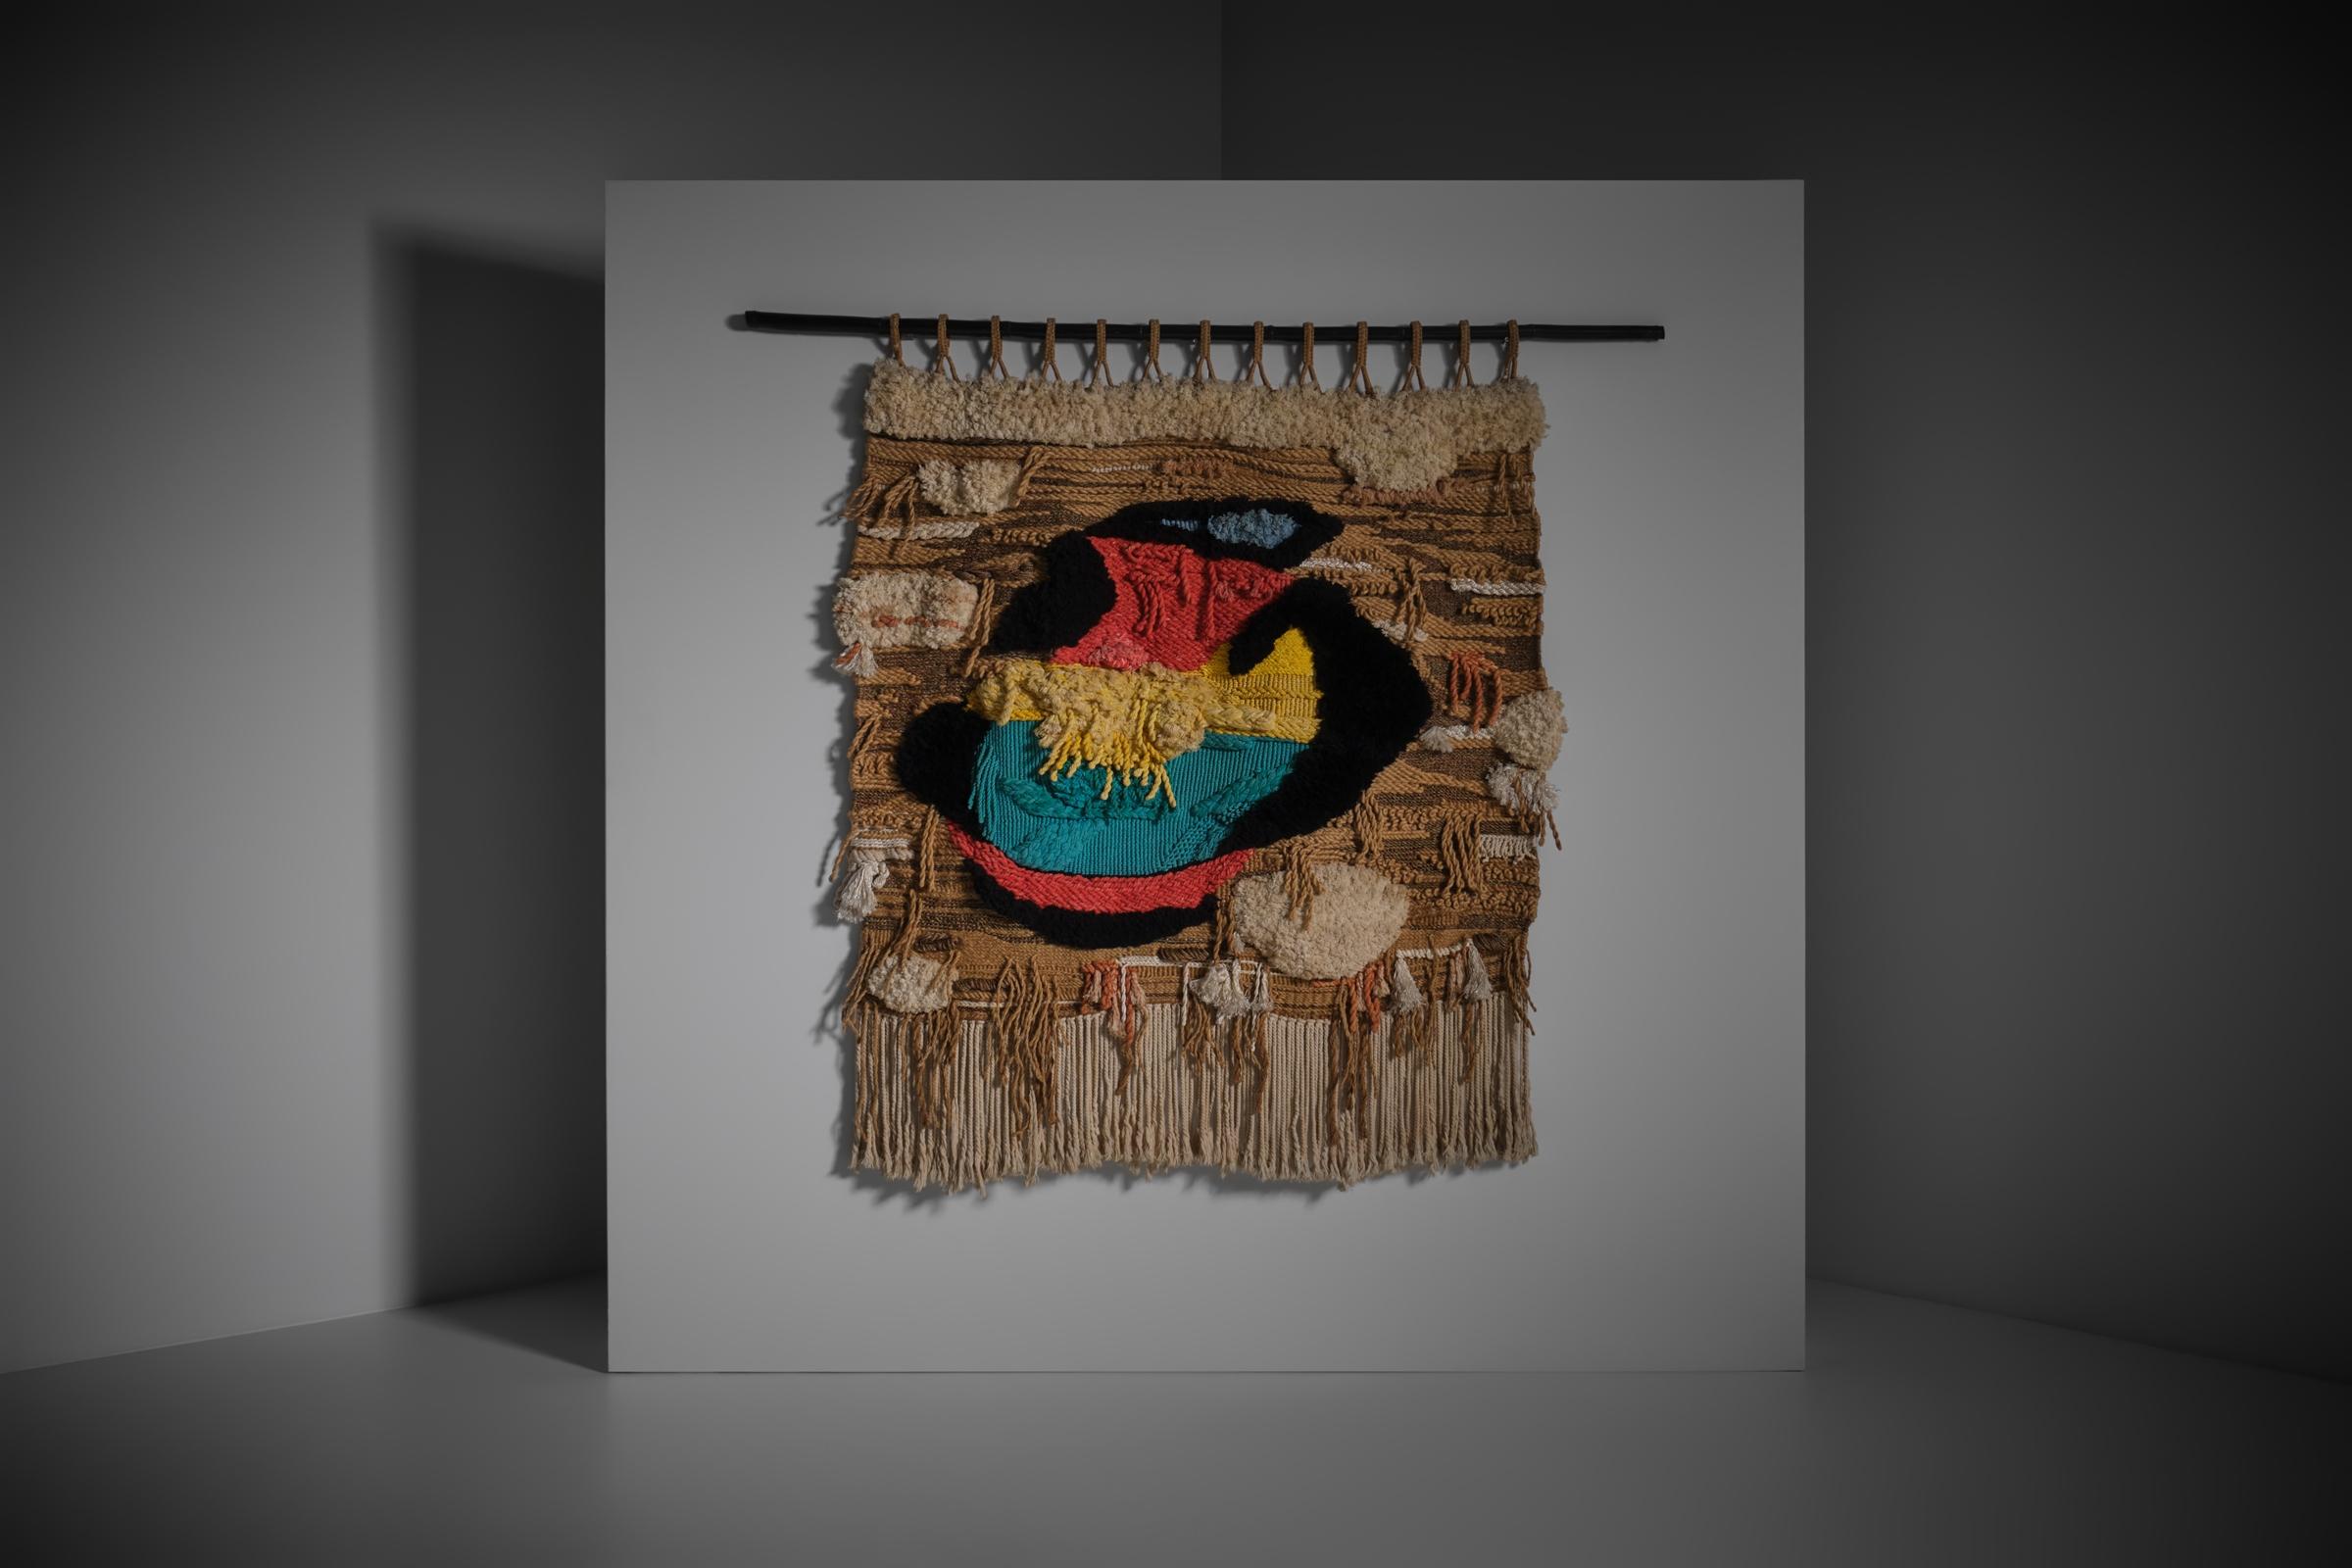 Abstract macrame wall tapestry 'Homenatge Miró', Catalonia Spain 1980. The tapestry is composed of different materials and is exposing an interesting play of textures and patterns. All the ropes and threads are custom made for this tapestry by the